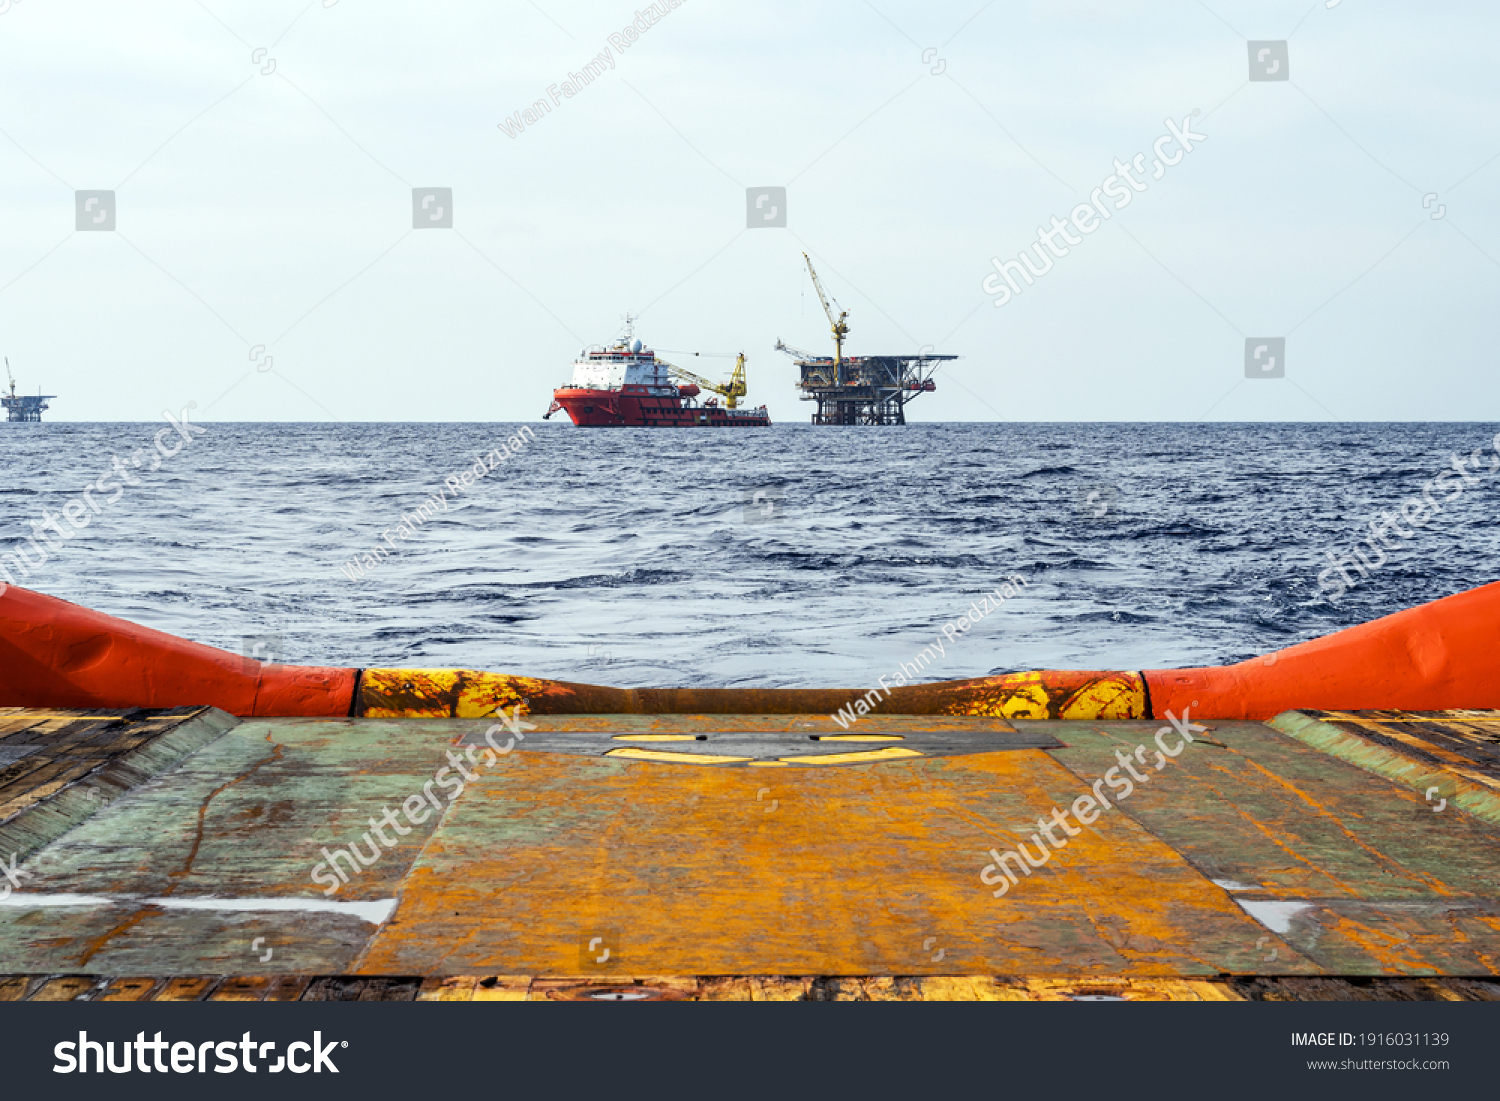 An anchor handling tug boat leaving an offshore oil production platform with a construction vessel moored next to it #1916031139